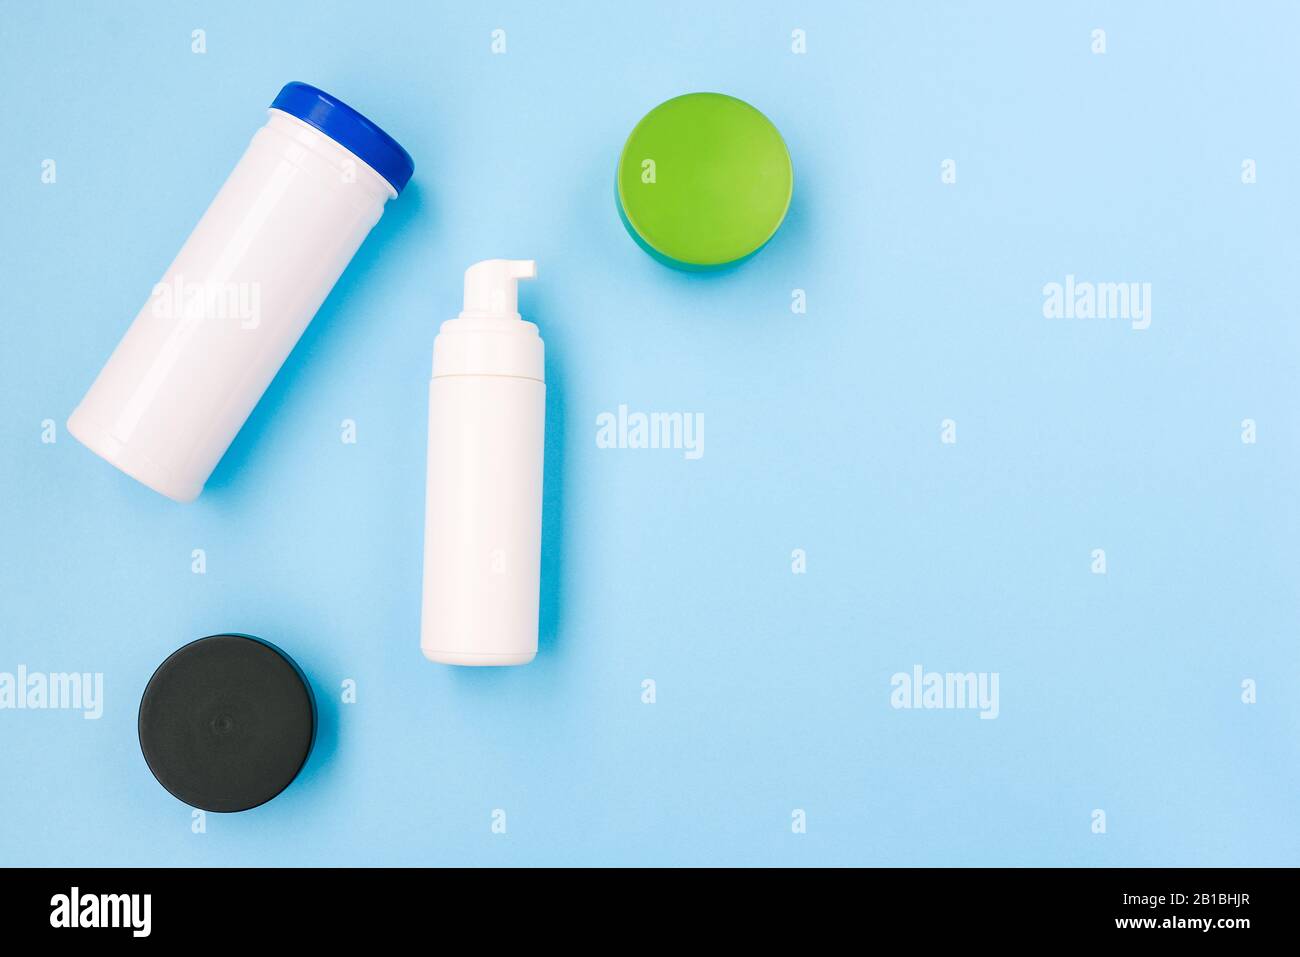 Female cosmetic products on a blue background. Green and black jar with cream. White can for wet wipes. Top view, copy space Stock Photo